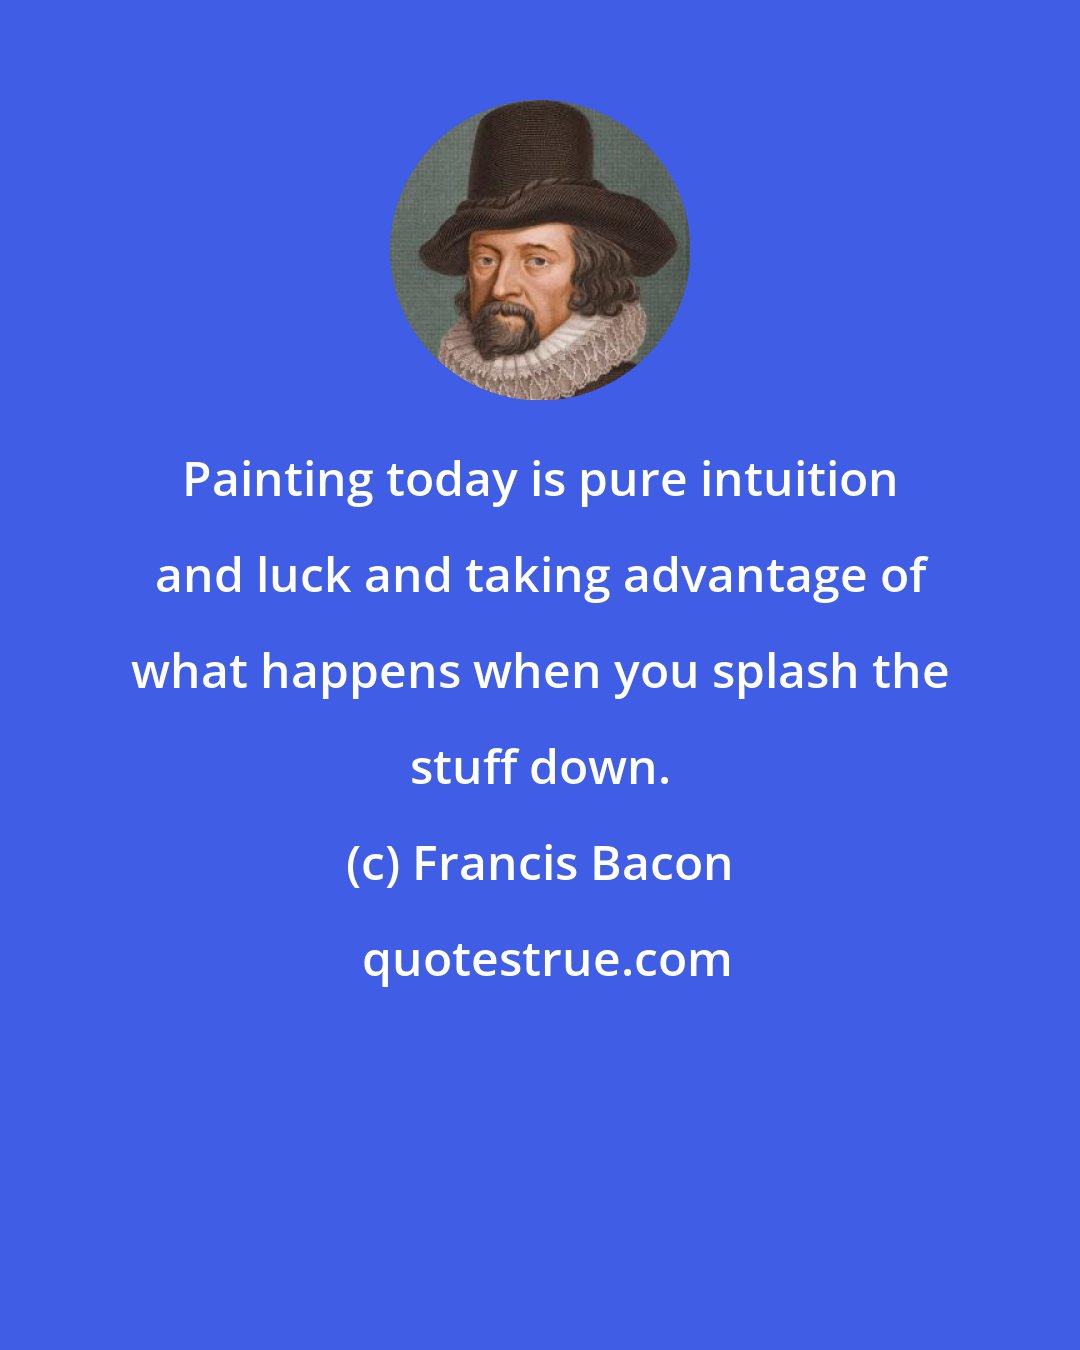 Francis Bacon: Painting today is pure intuition and luck and taking advantage of what happens when you splash the stuff down.